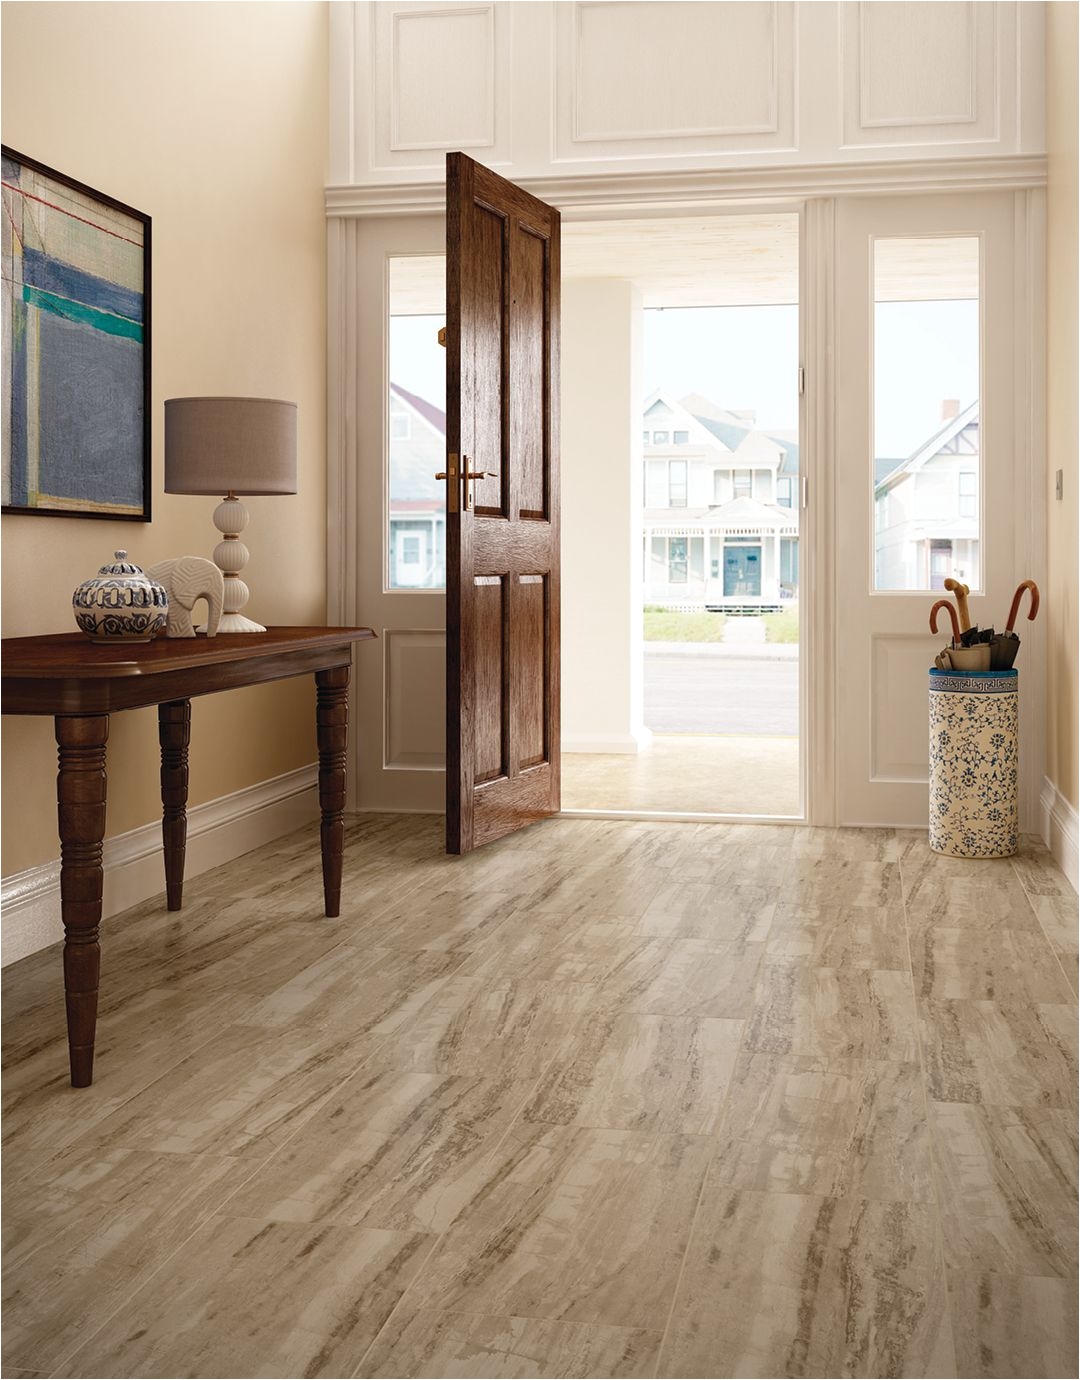 Best Laminate Flooring for Mudroom Marble Tile is A Great Natural Transition Indoors Flooring Ideas